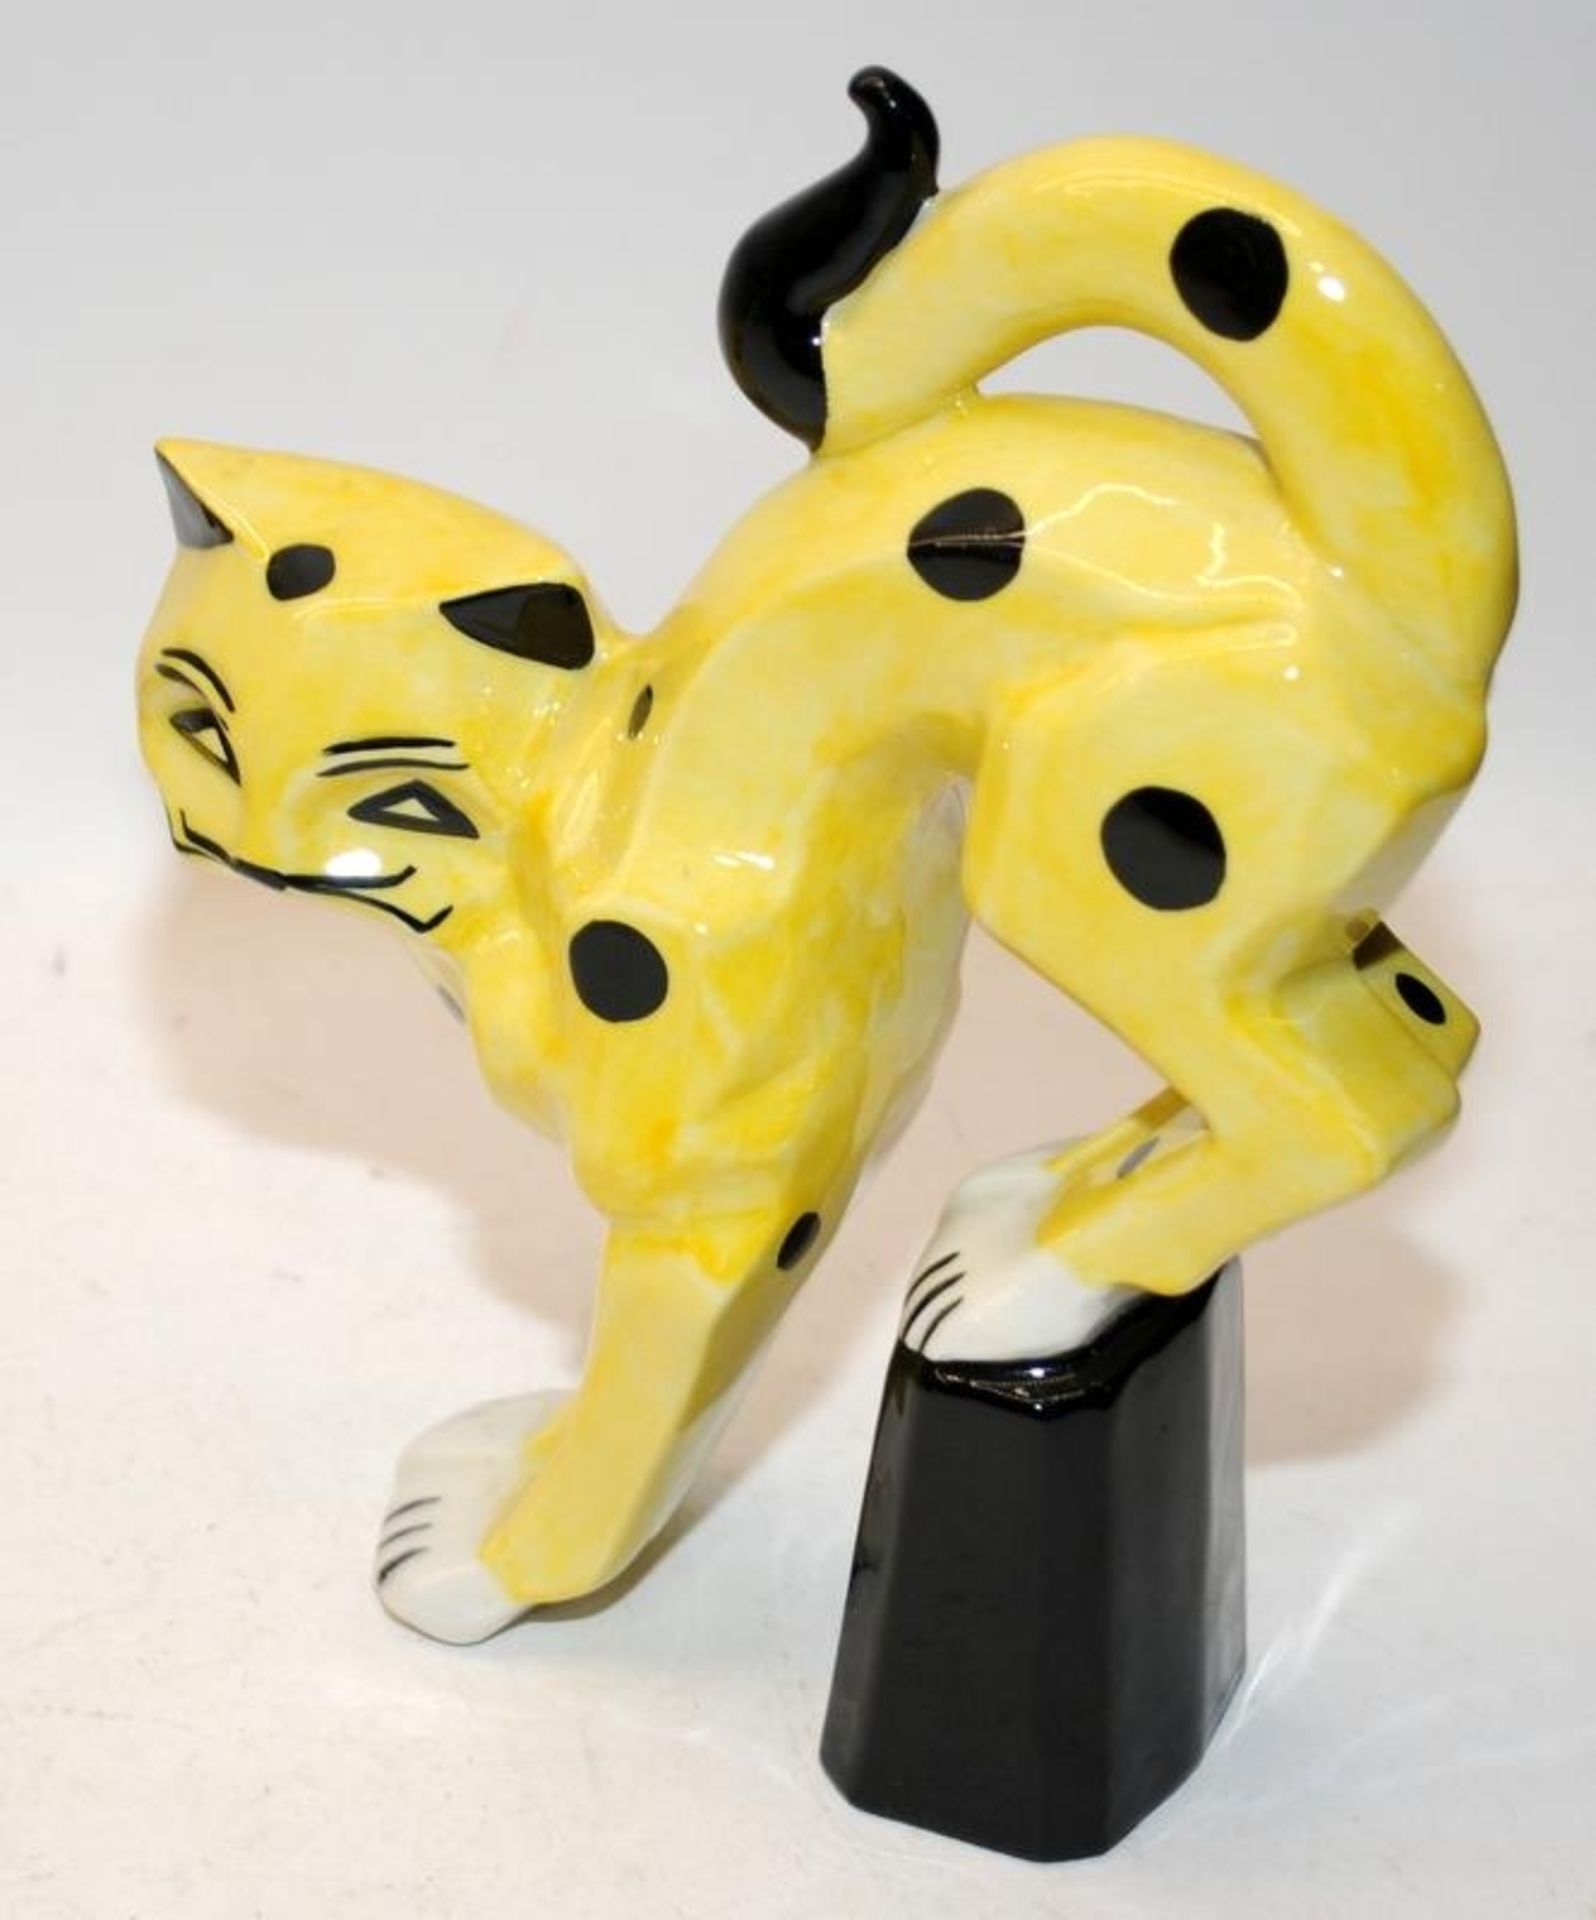 Lorna Bailey Cats Set: Large Yellow/Black Polka Dot Cat Set, Leaping, Stretching and Laying. 3 in - Image 4 of 4